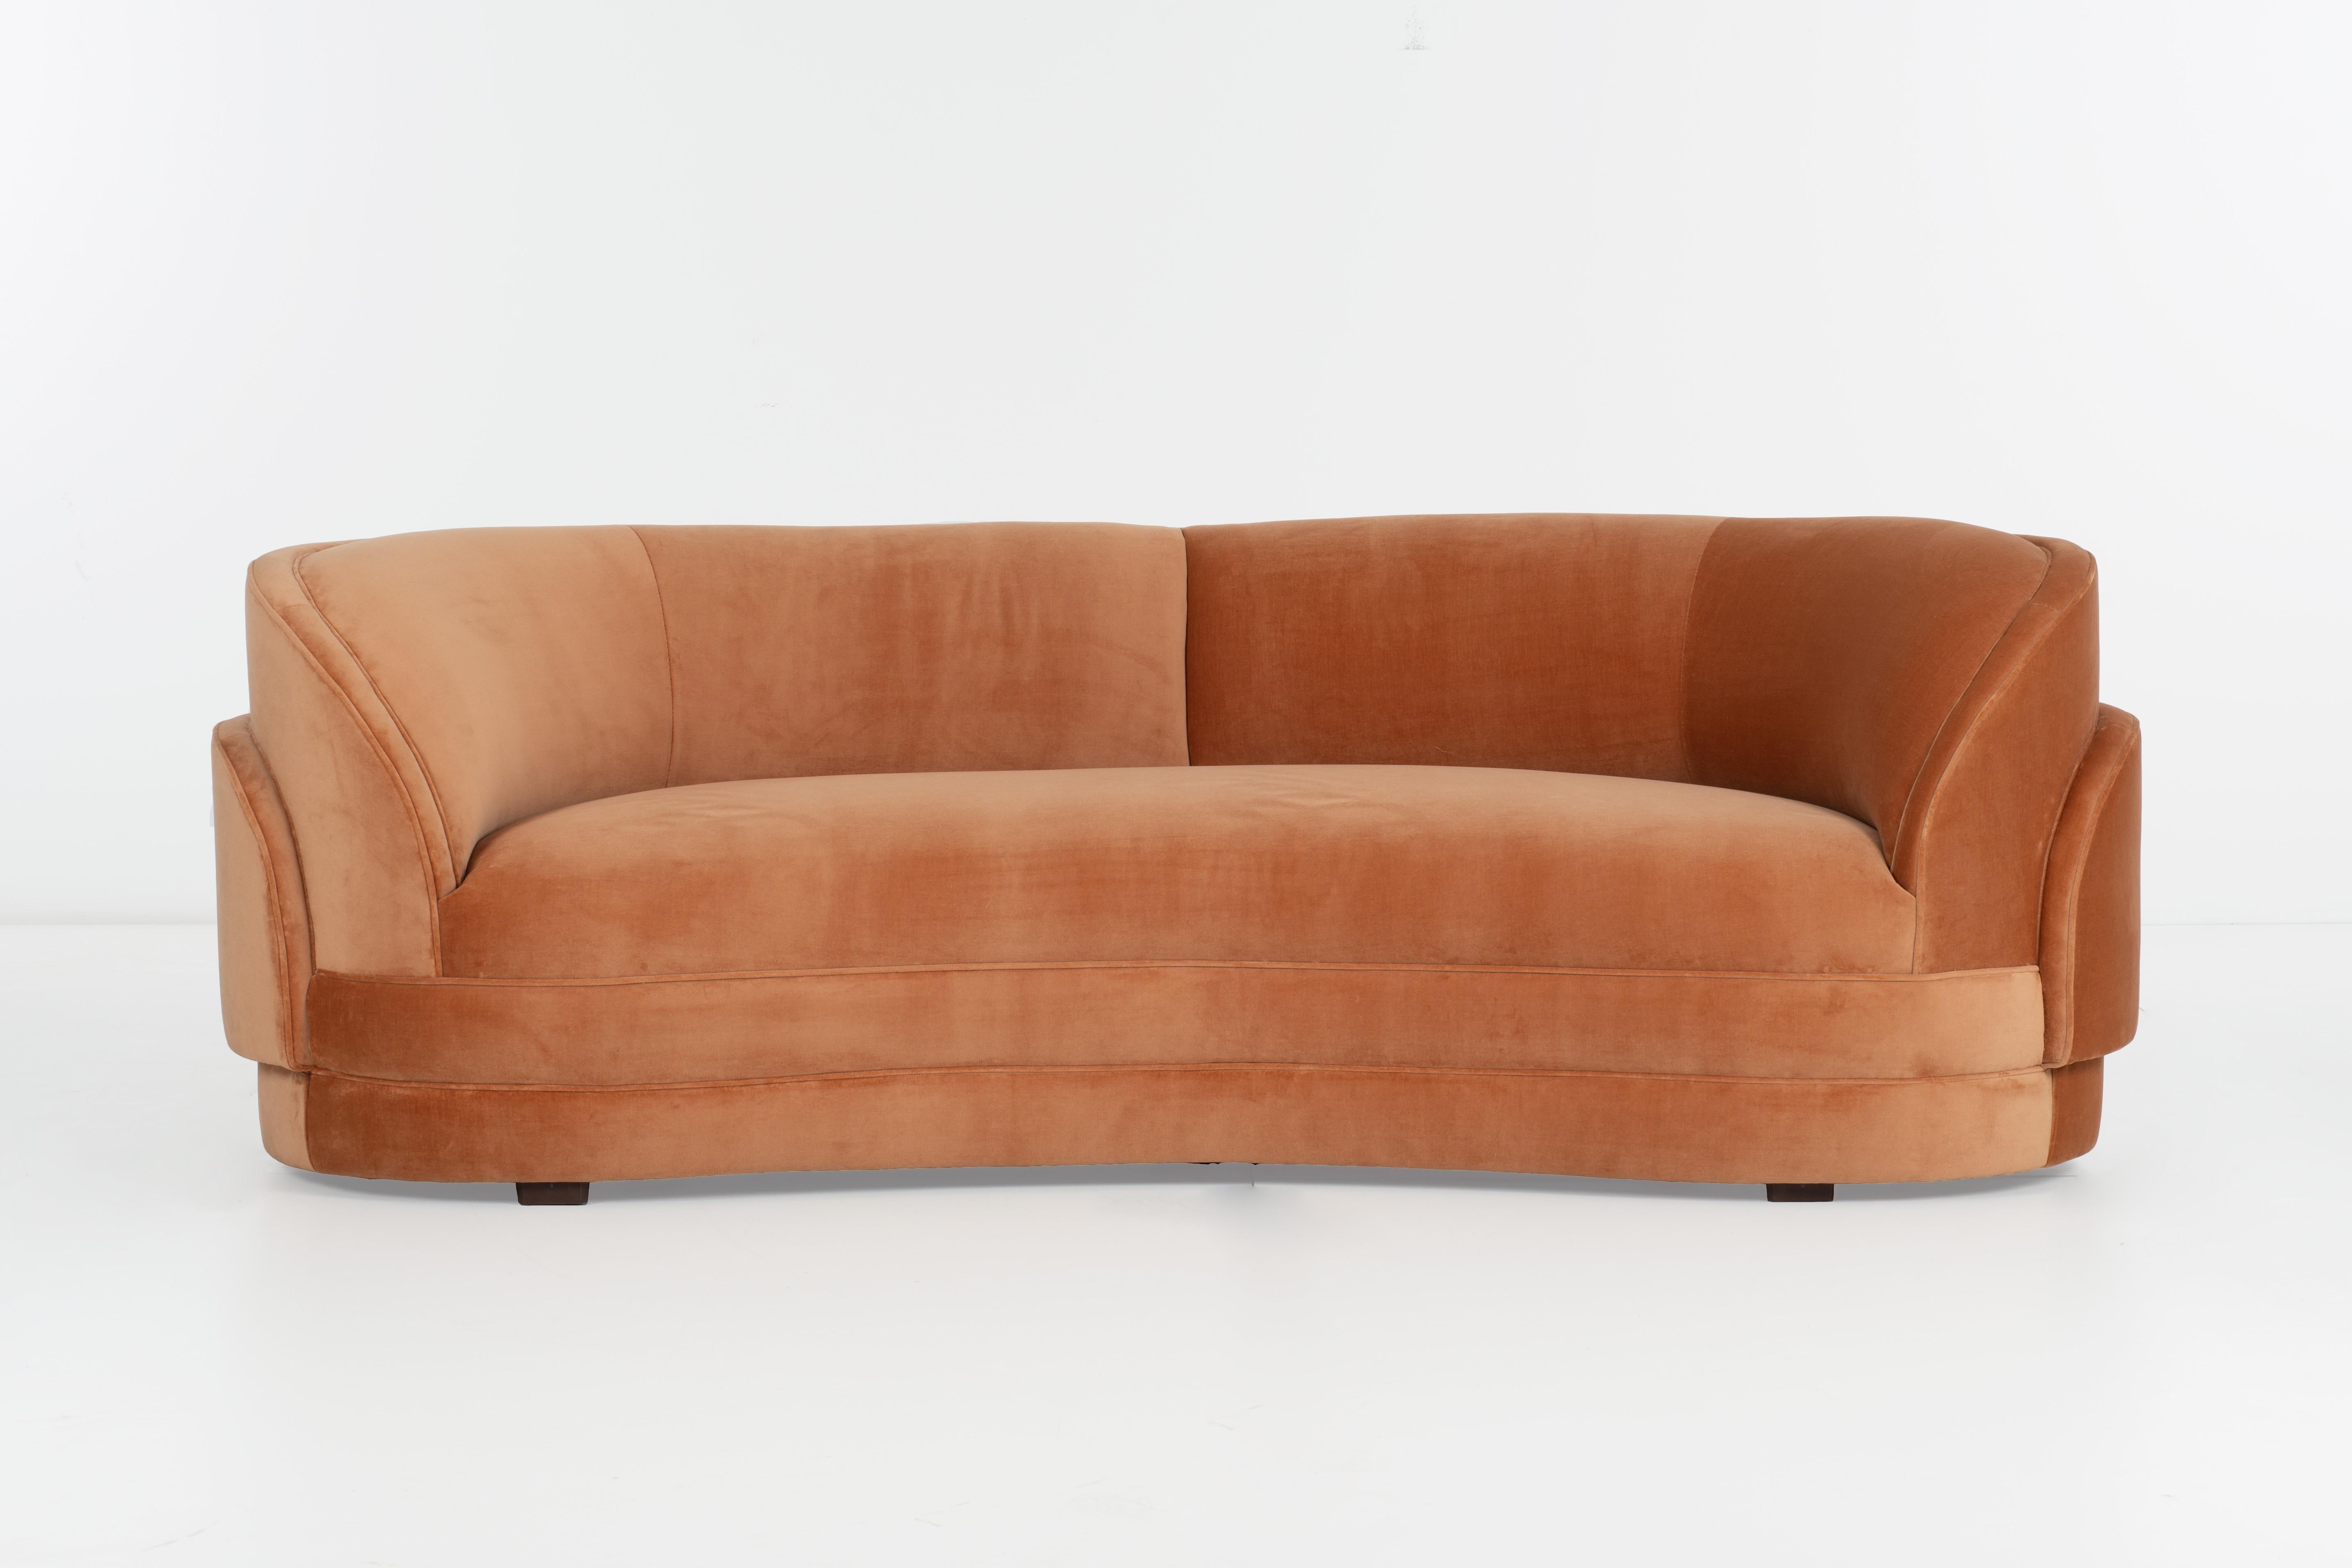 Pair of curved sofas with louvered backs. Upholstered with new foam in a peach colored cotton velvet.